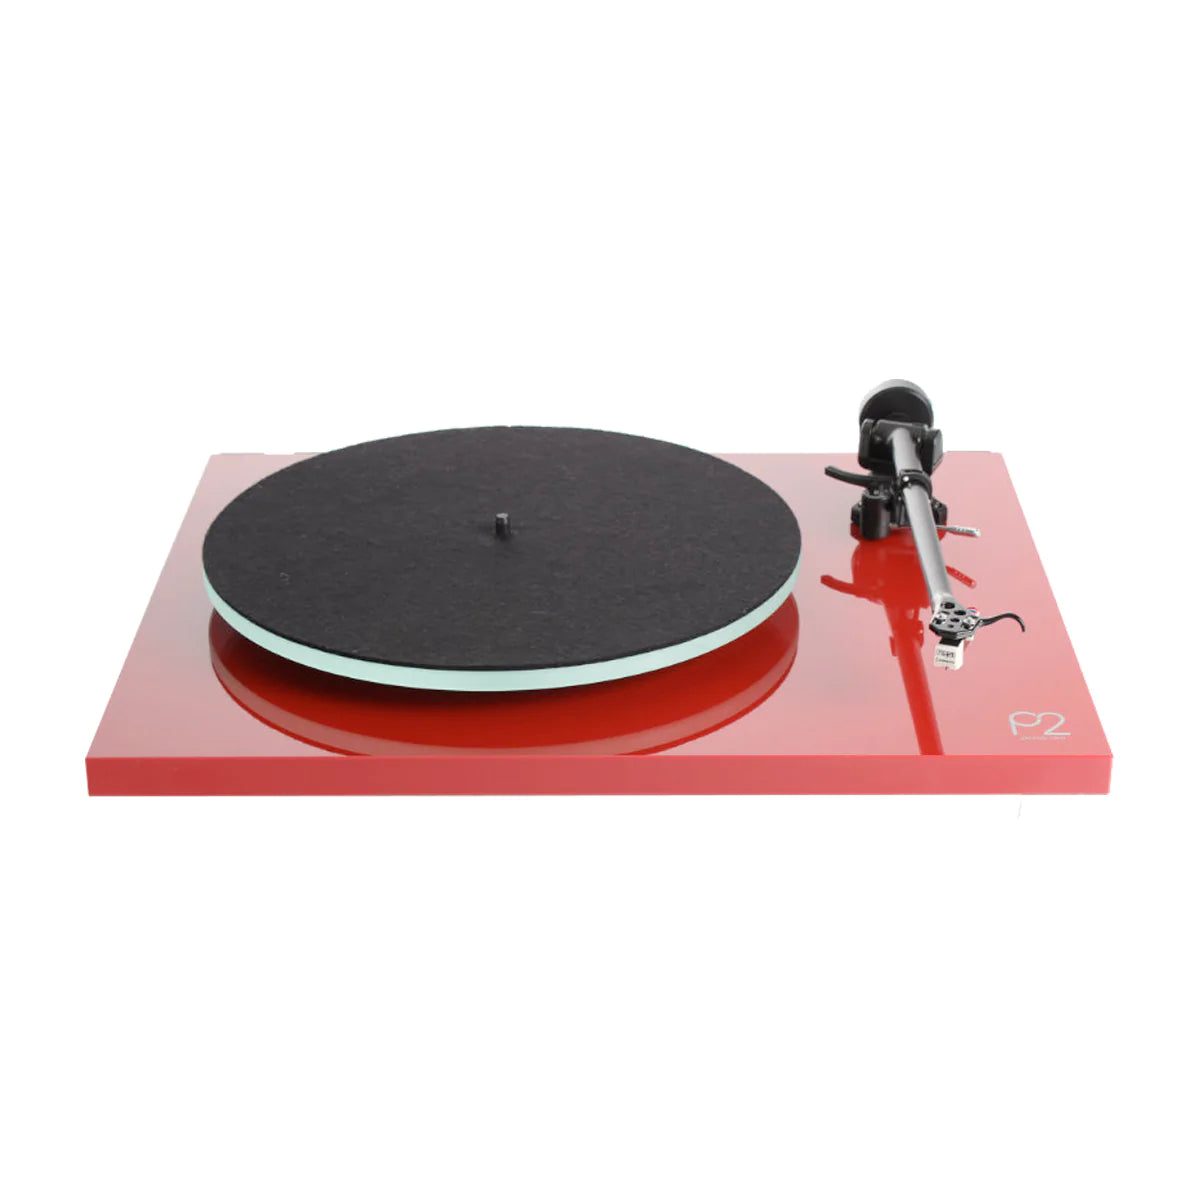 Rega Planar 2 Turntable - Gloss Red - The Audio Experts